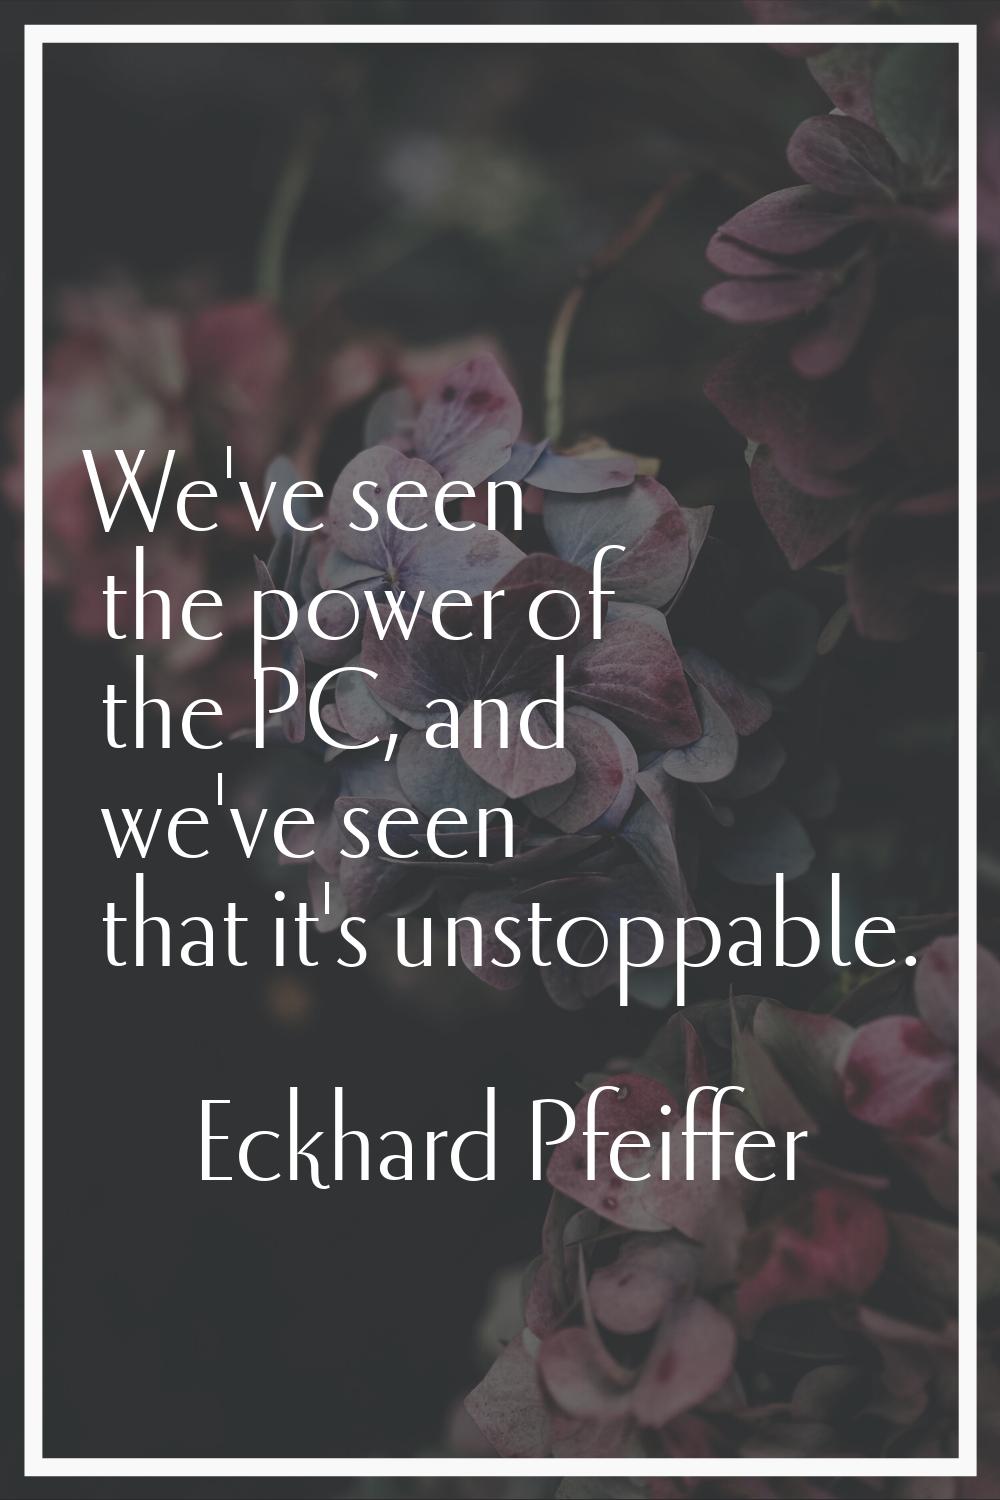 We've seen the power of the PC, and we've seen that it's unstoppable.